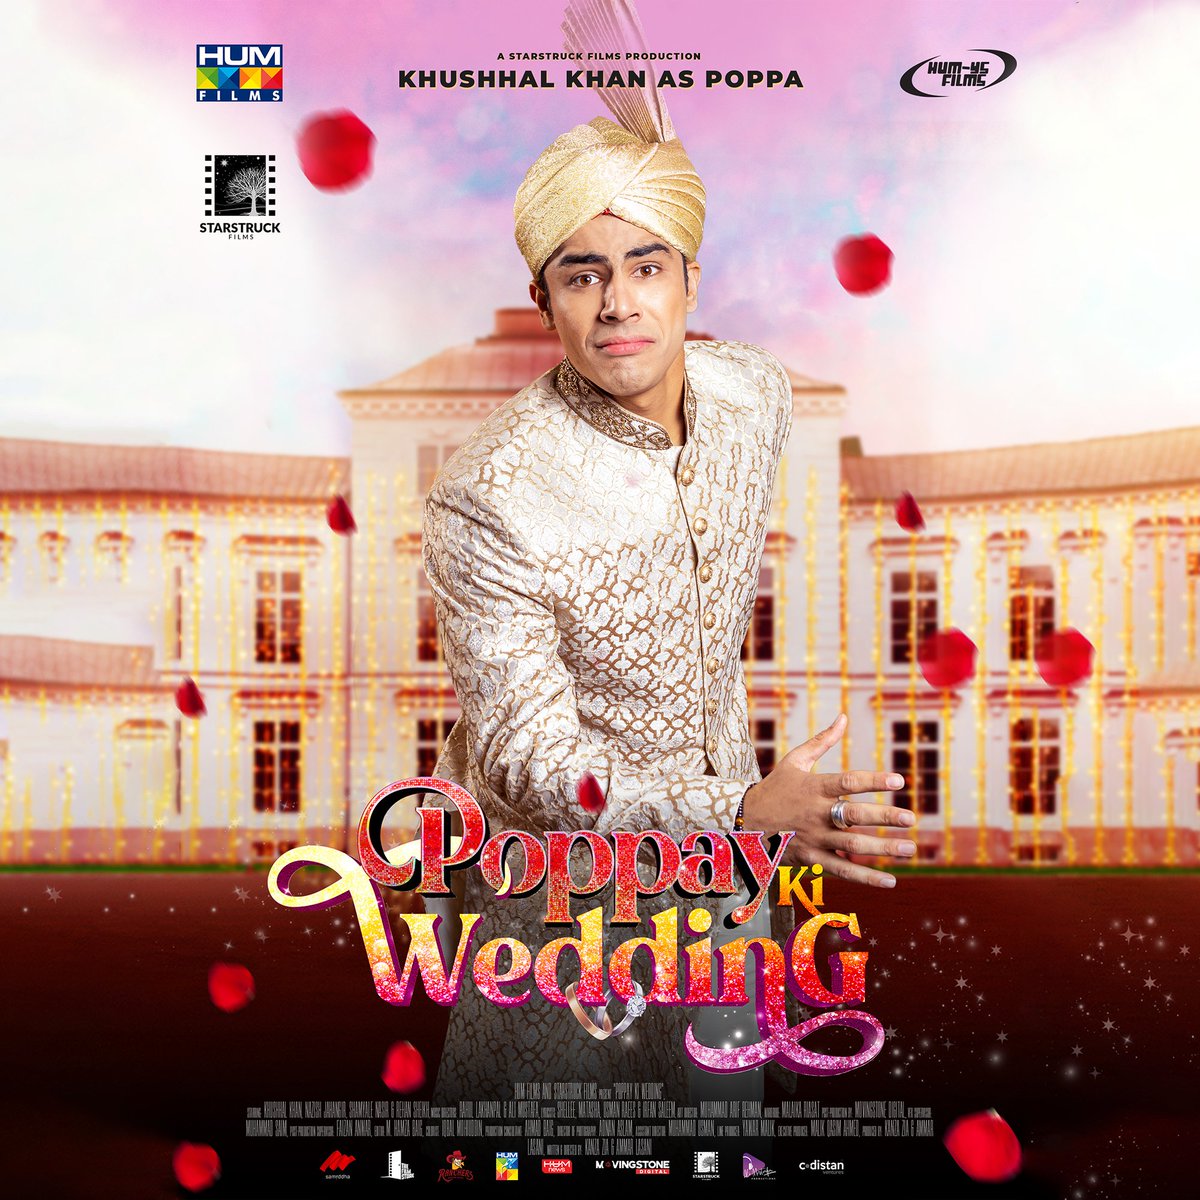 Lollywood's latest release, #PoppayKiWedding has collected 70 lakhs at the box office after the end of the first week. The film is expected to have a lifetime business of hardly 1 crore considering its low hype and booking. Courtesy: EPK #KhushhalKhan #NazishJahangir